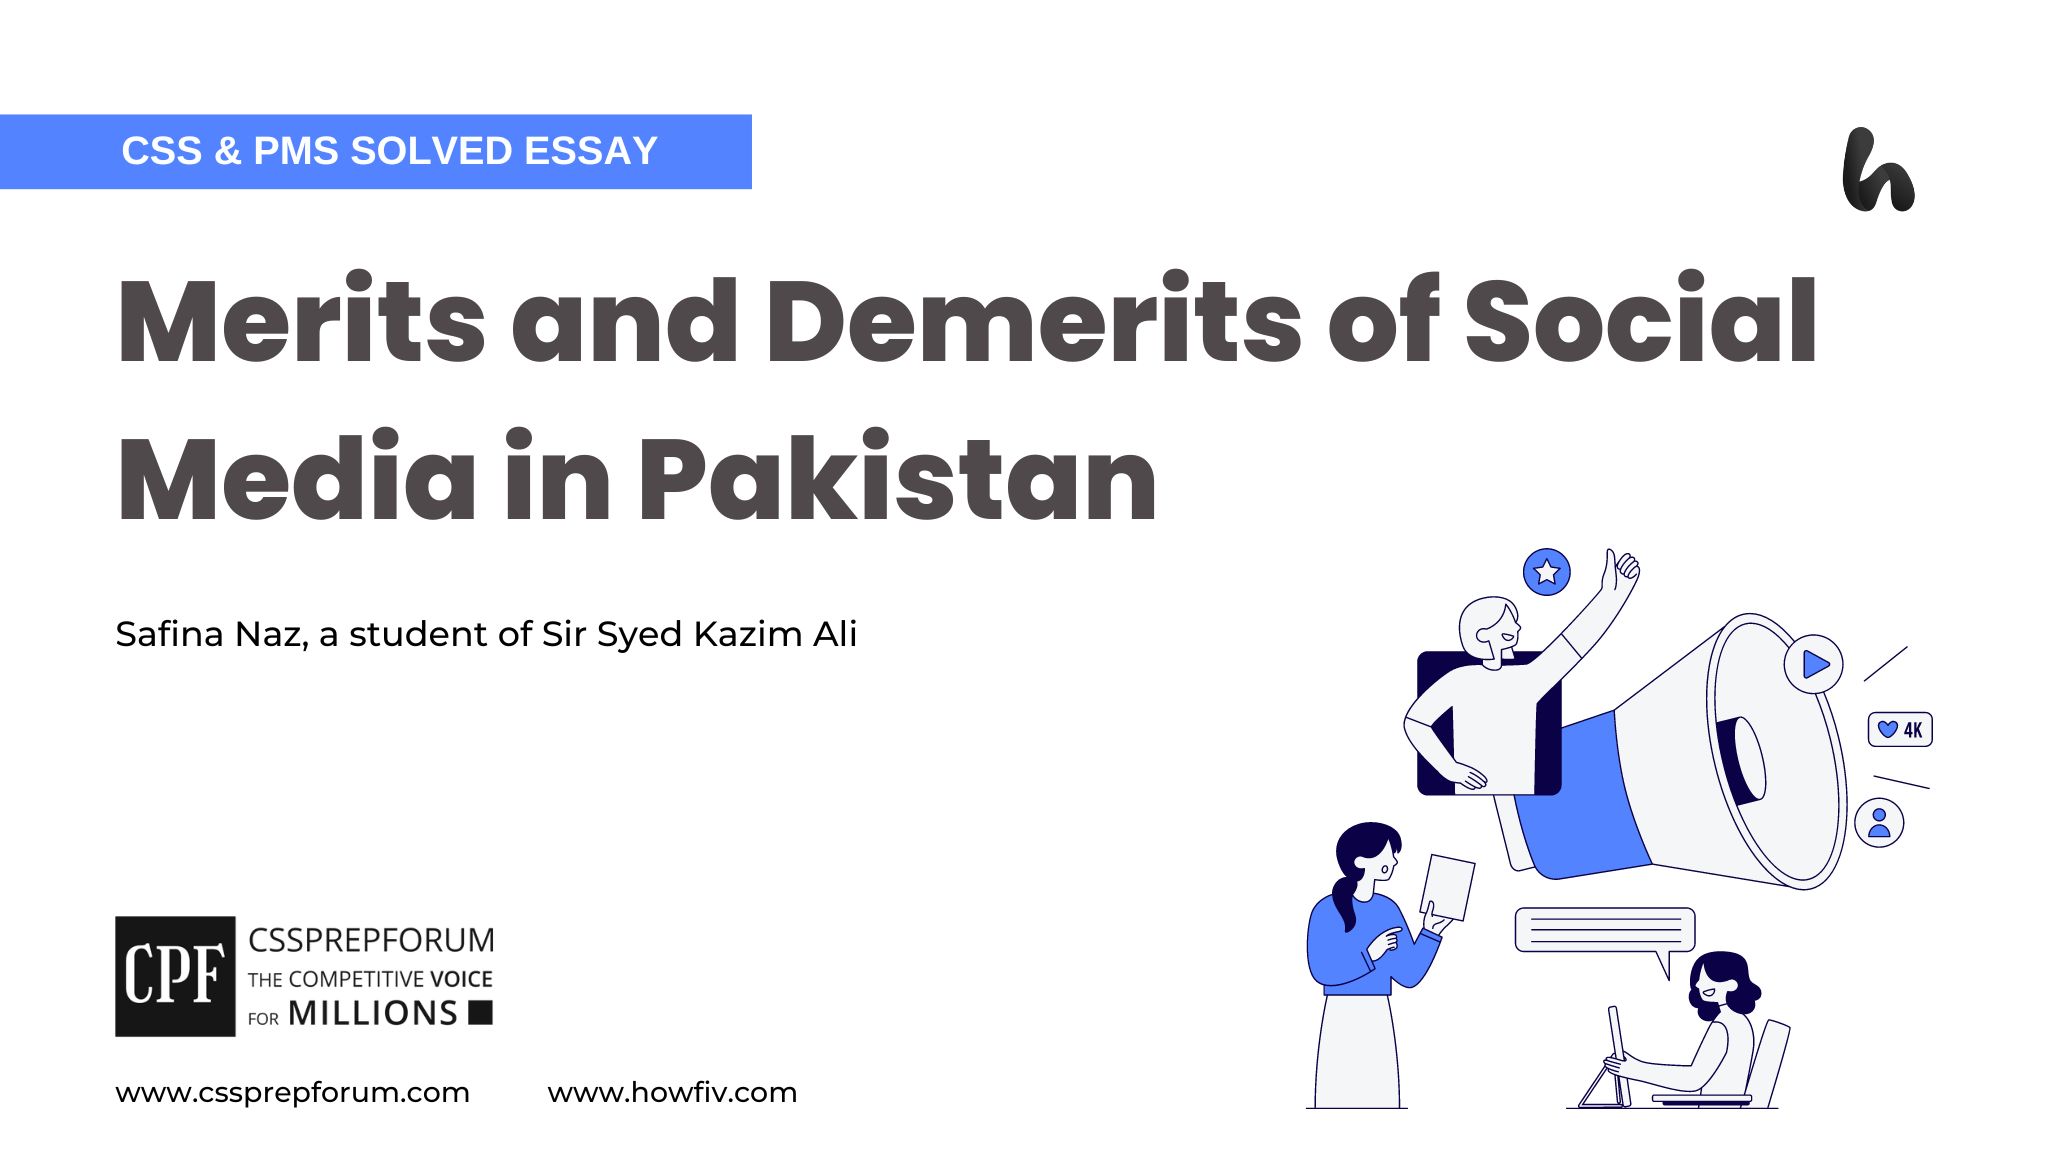 Merits and Demerits of Social Media in Pakistan by Safina Naz